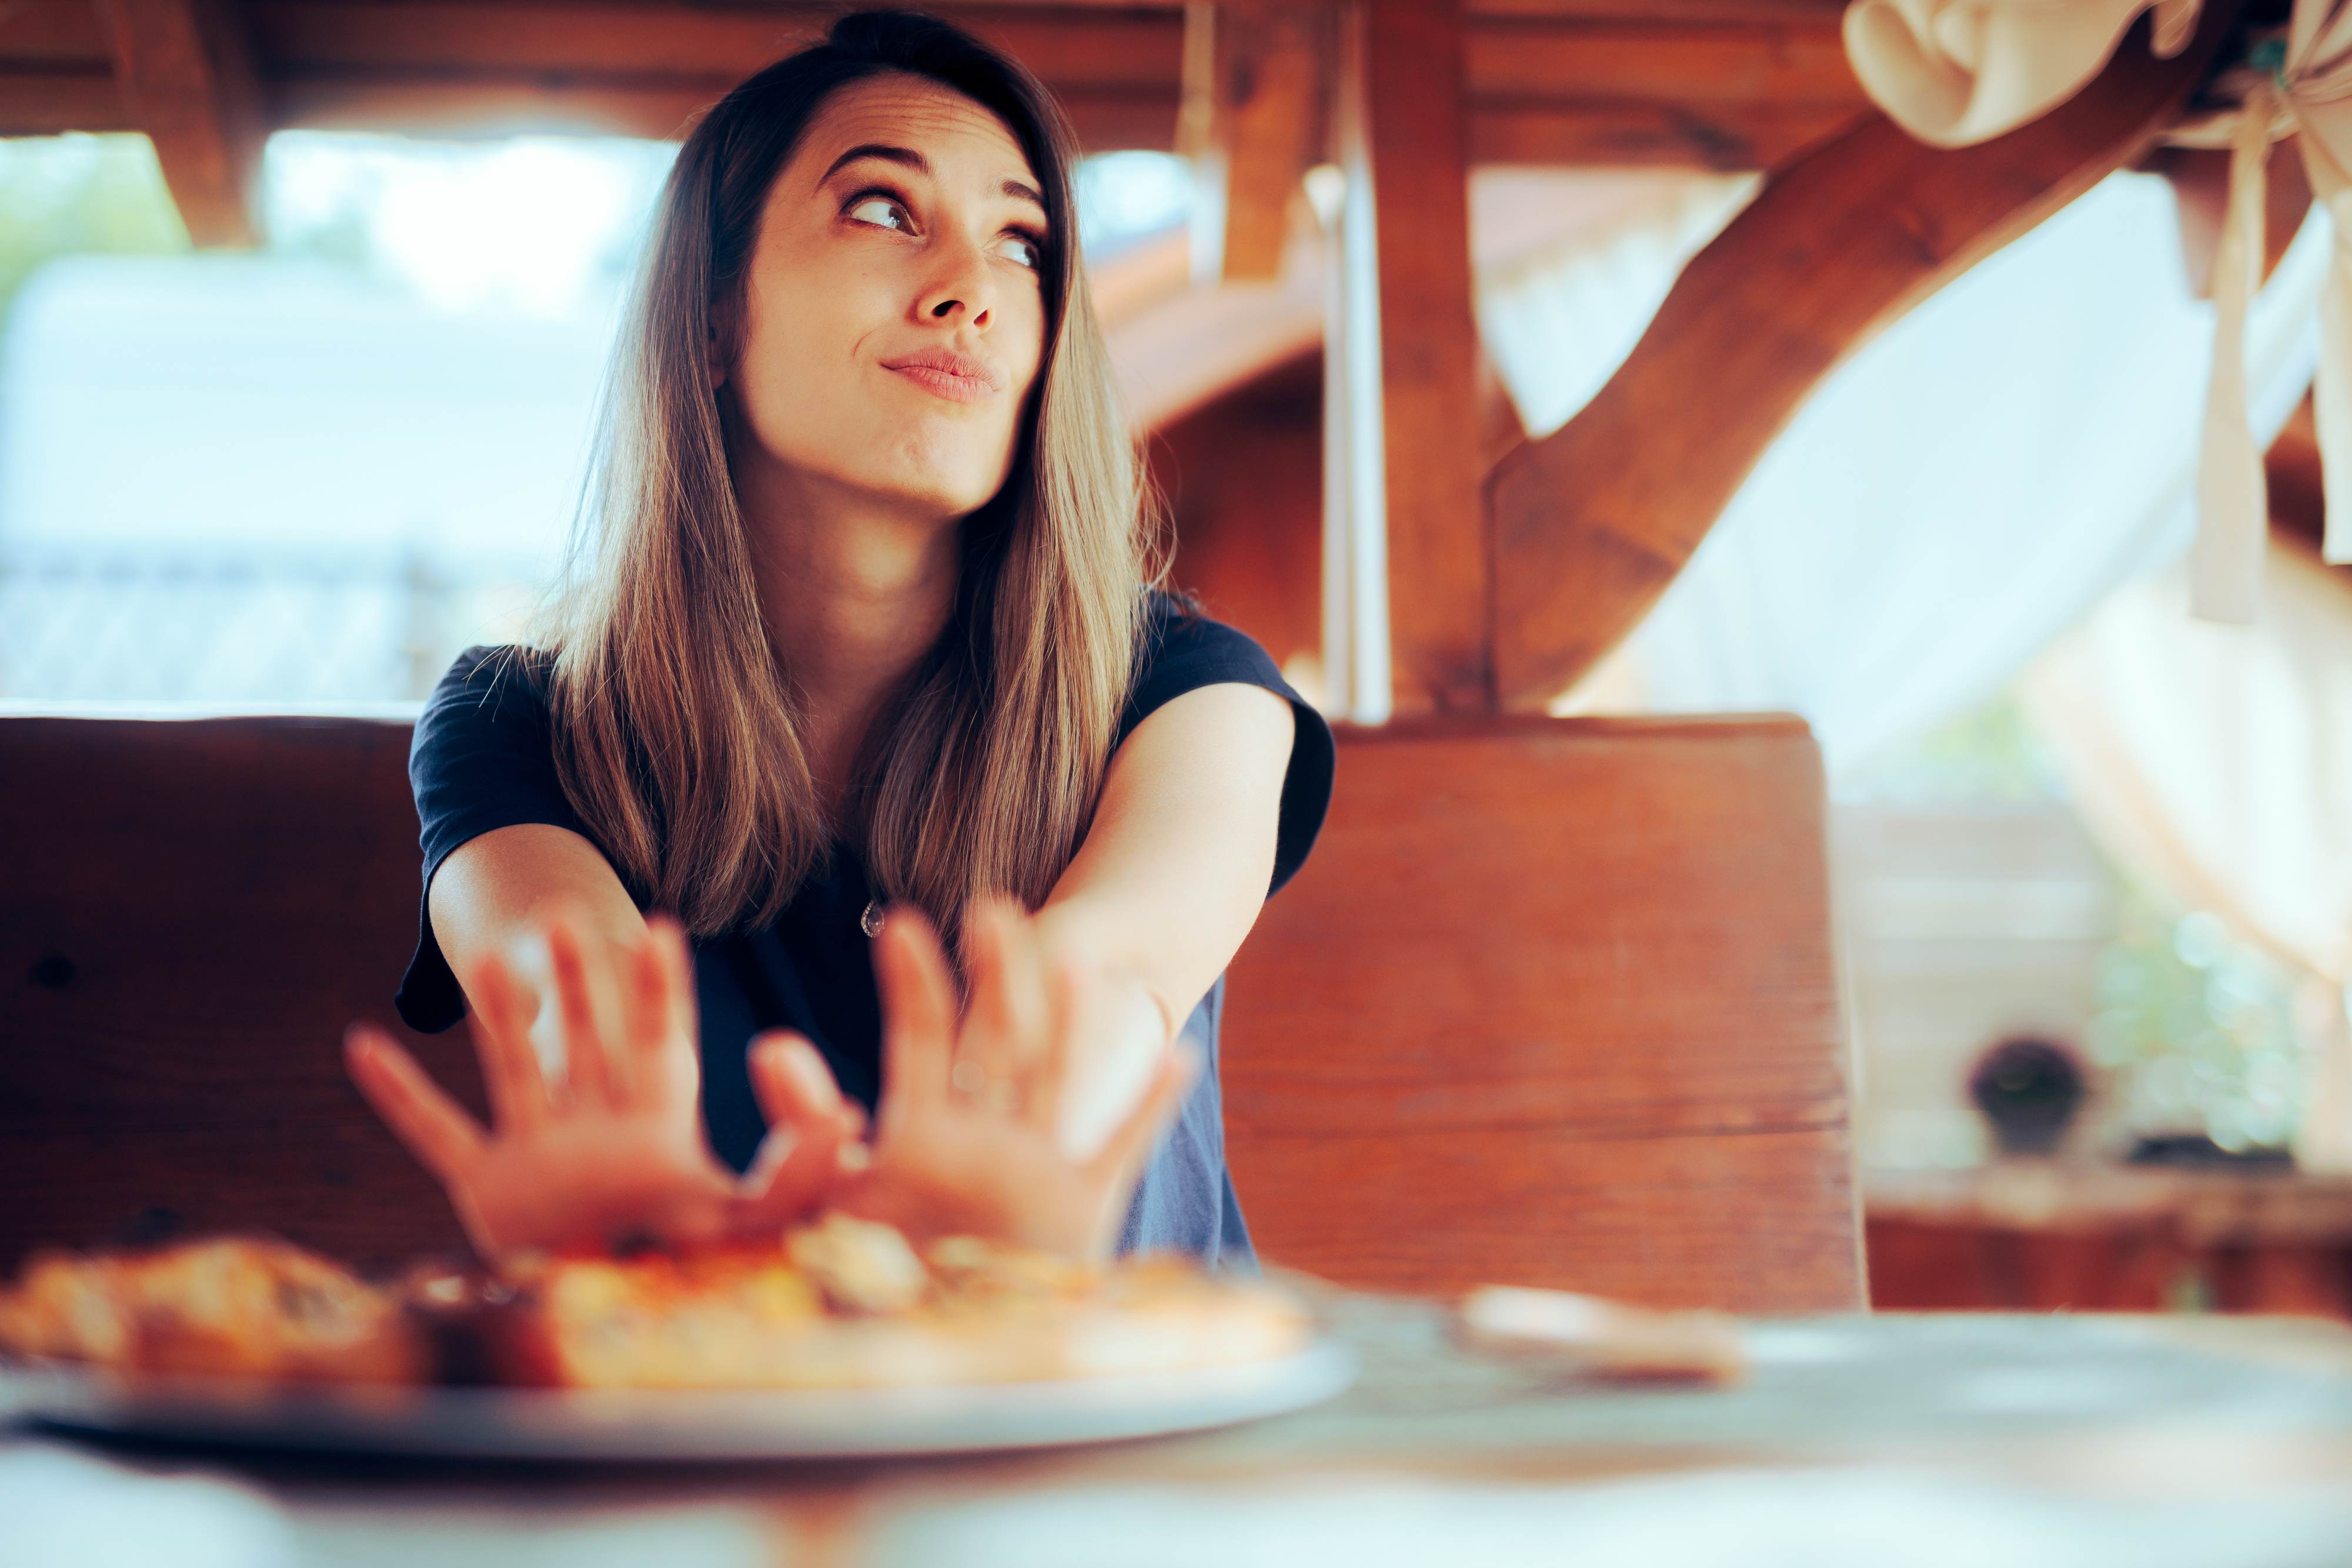 Woman gesturing no to food on table, looking away with thoughtful expression